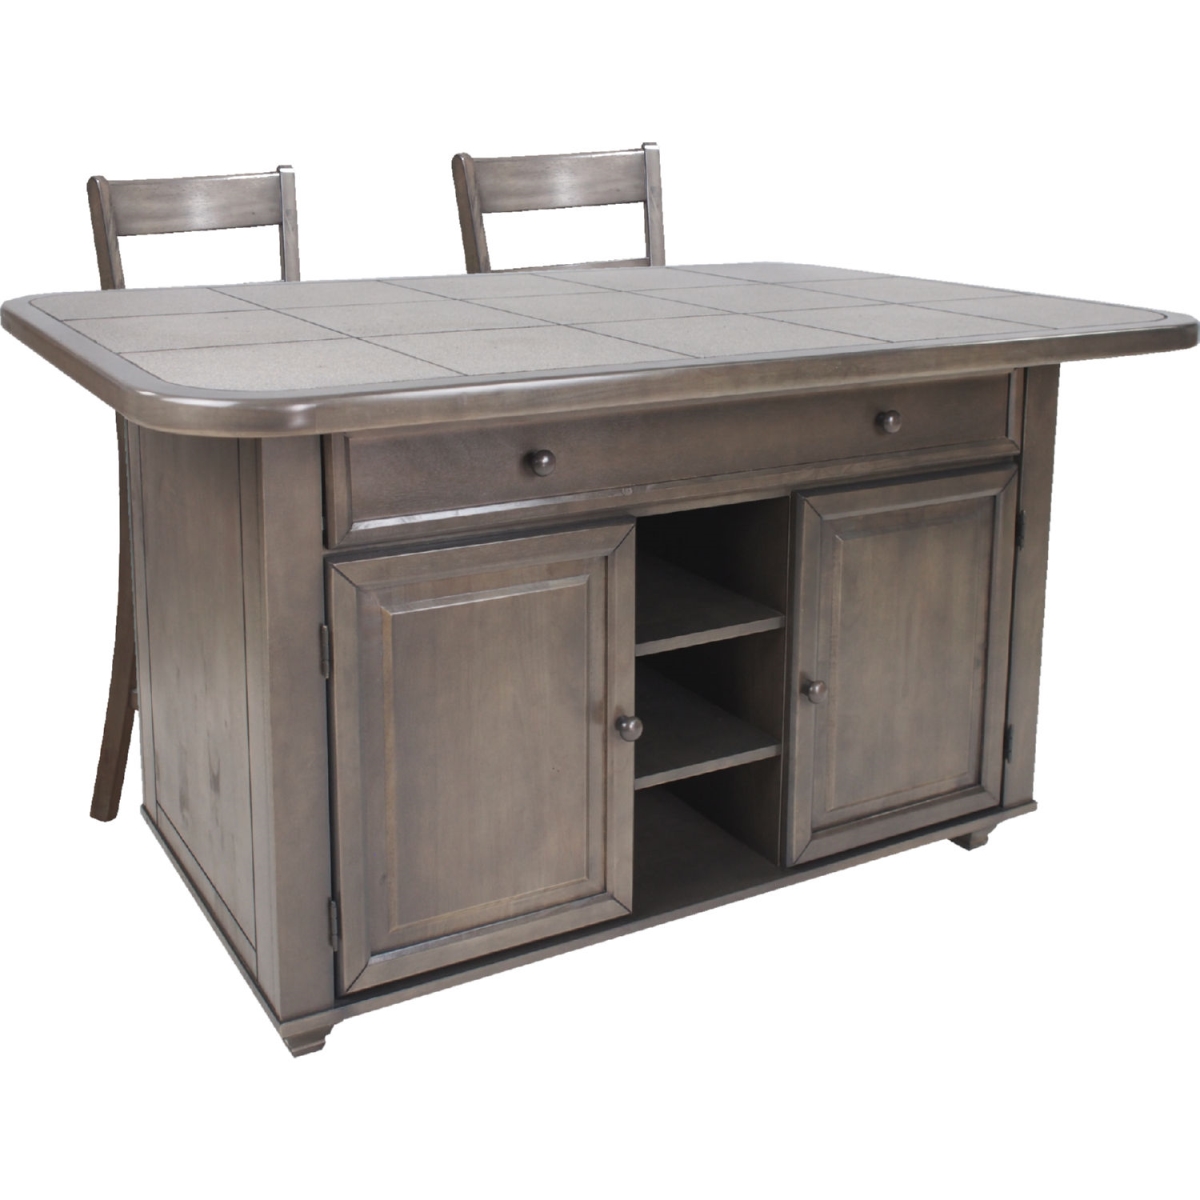 Picture of Sunset Trading CY-KIT2-B200-AG3P 1.5 x 62.5 x 39 in. Shades of Gray Kitchen Island Set - Weathered Gray - 3 Piece